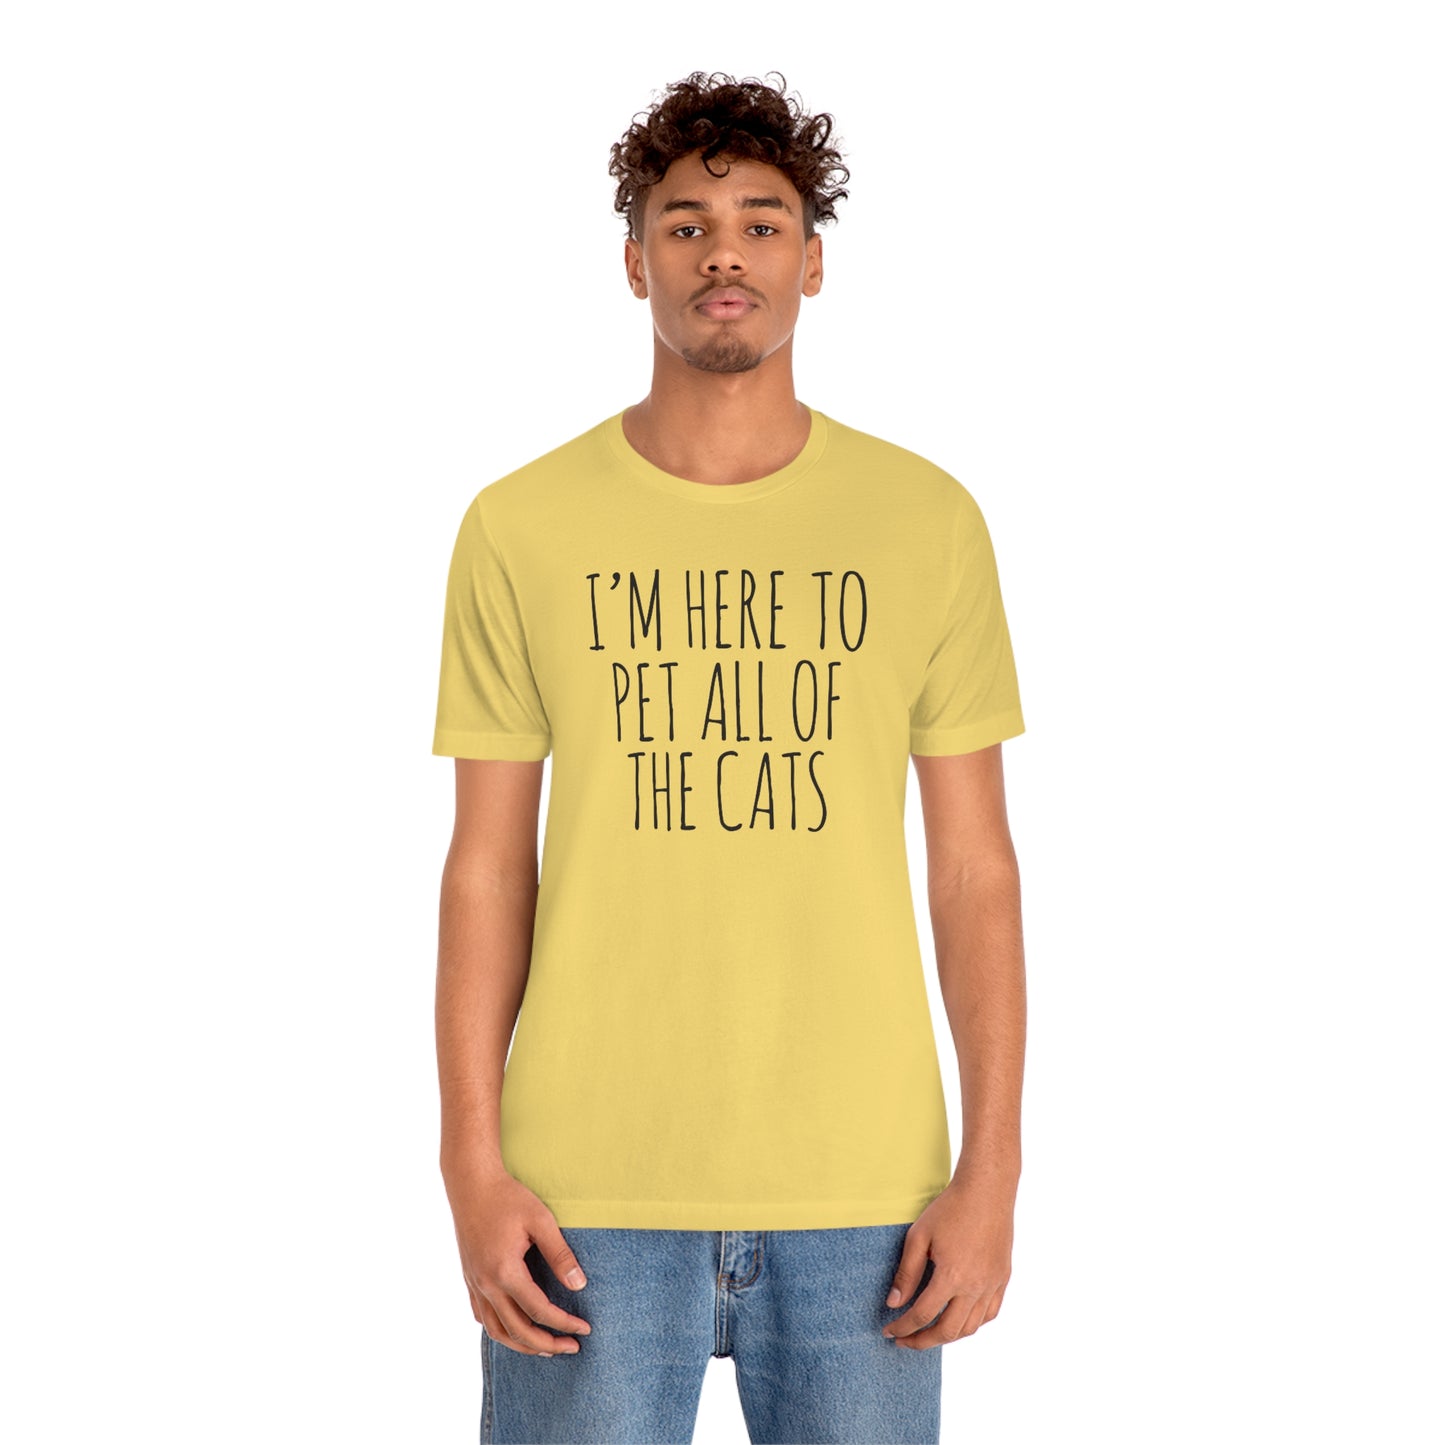 I'm Just Here To Pet All The Cats 2 - Unisex T-Shirt